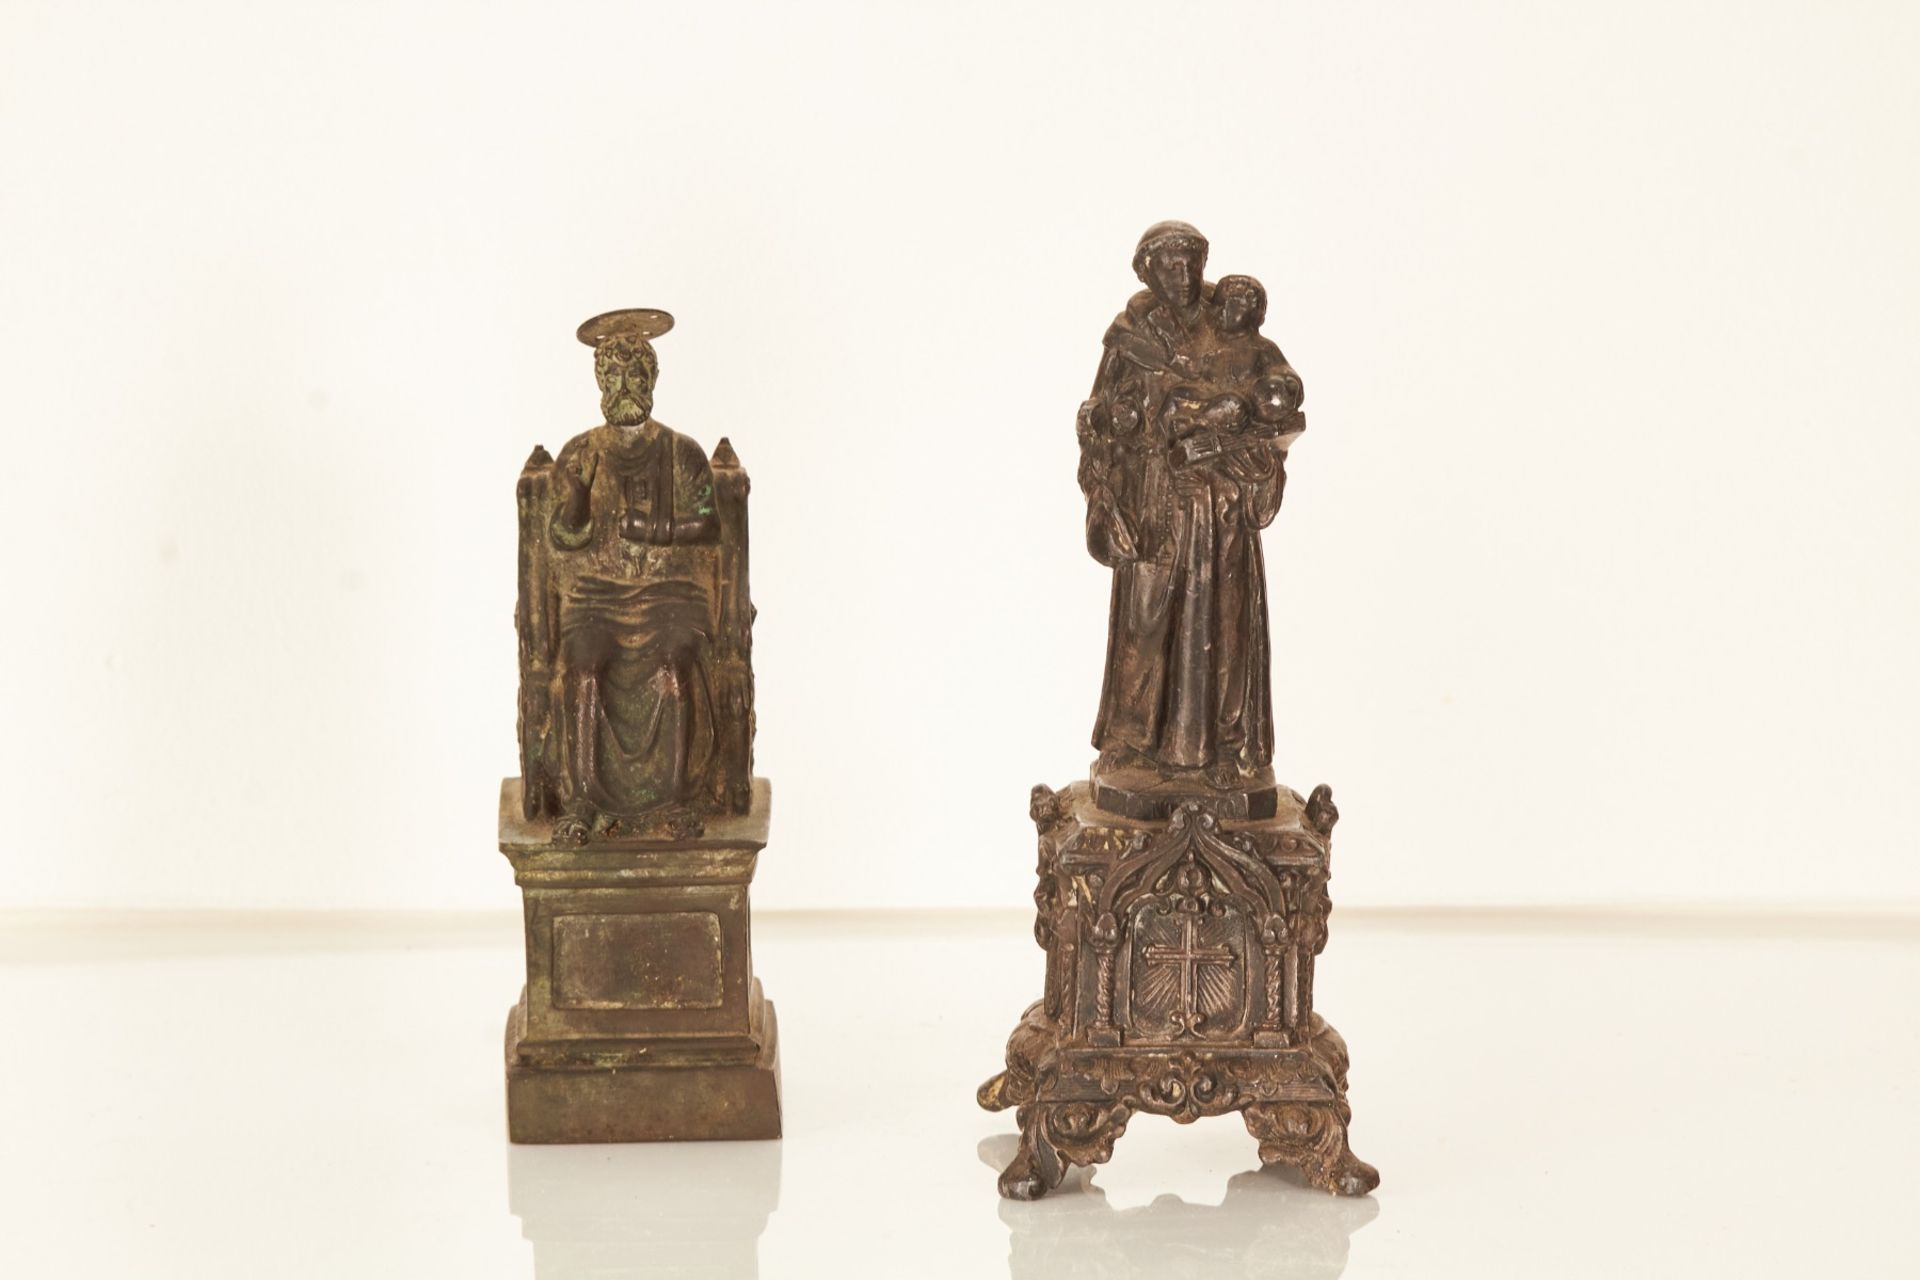 A 20th century bronze sculpture of a seated saint